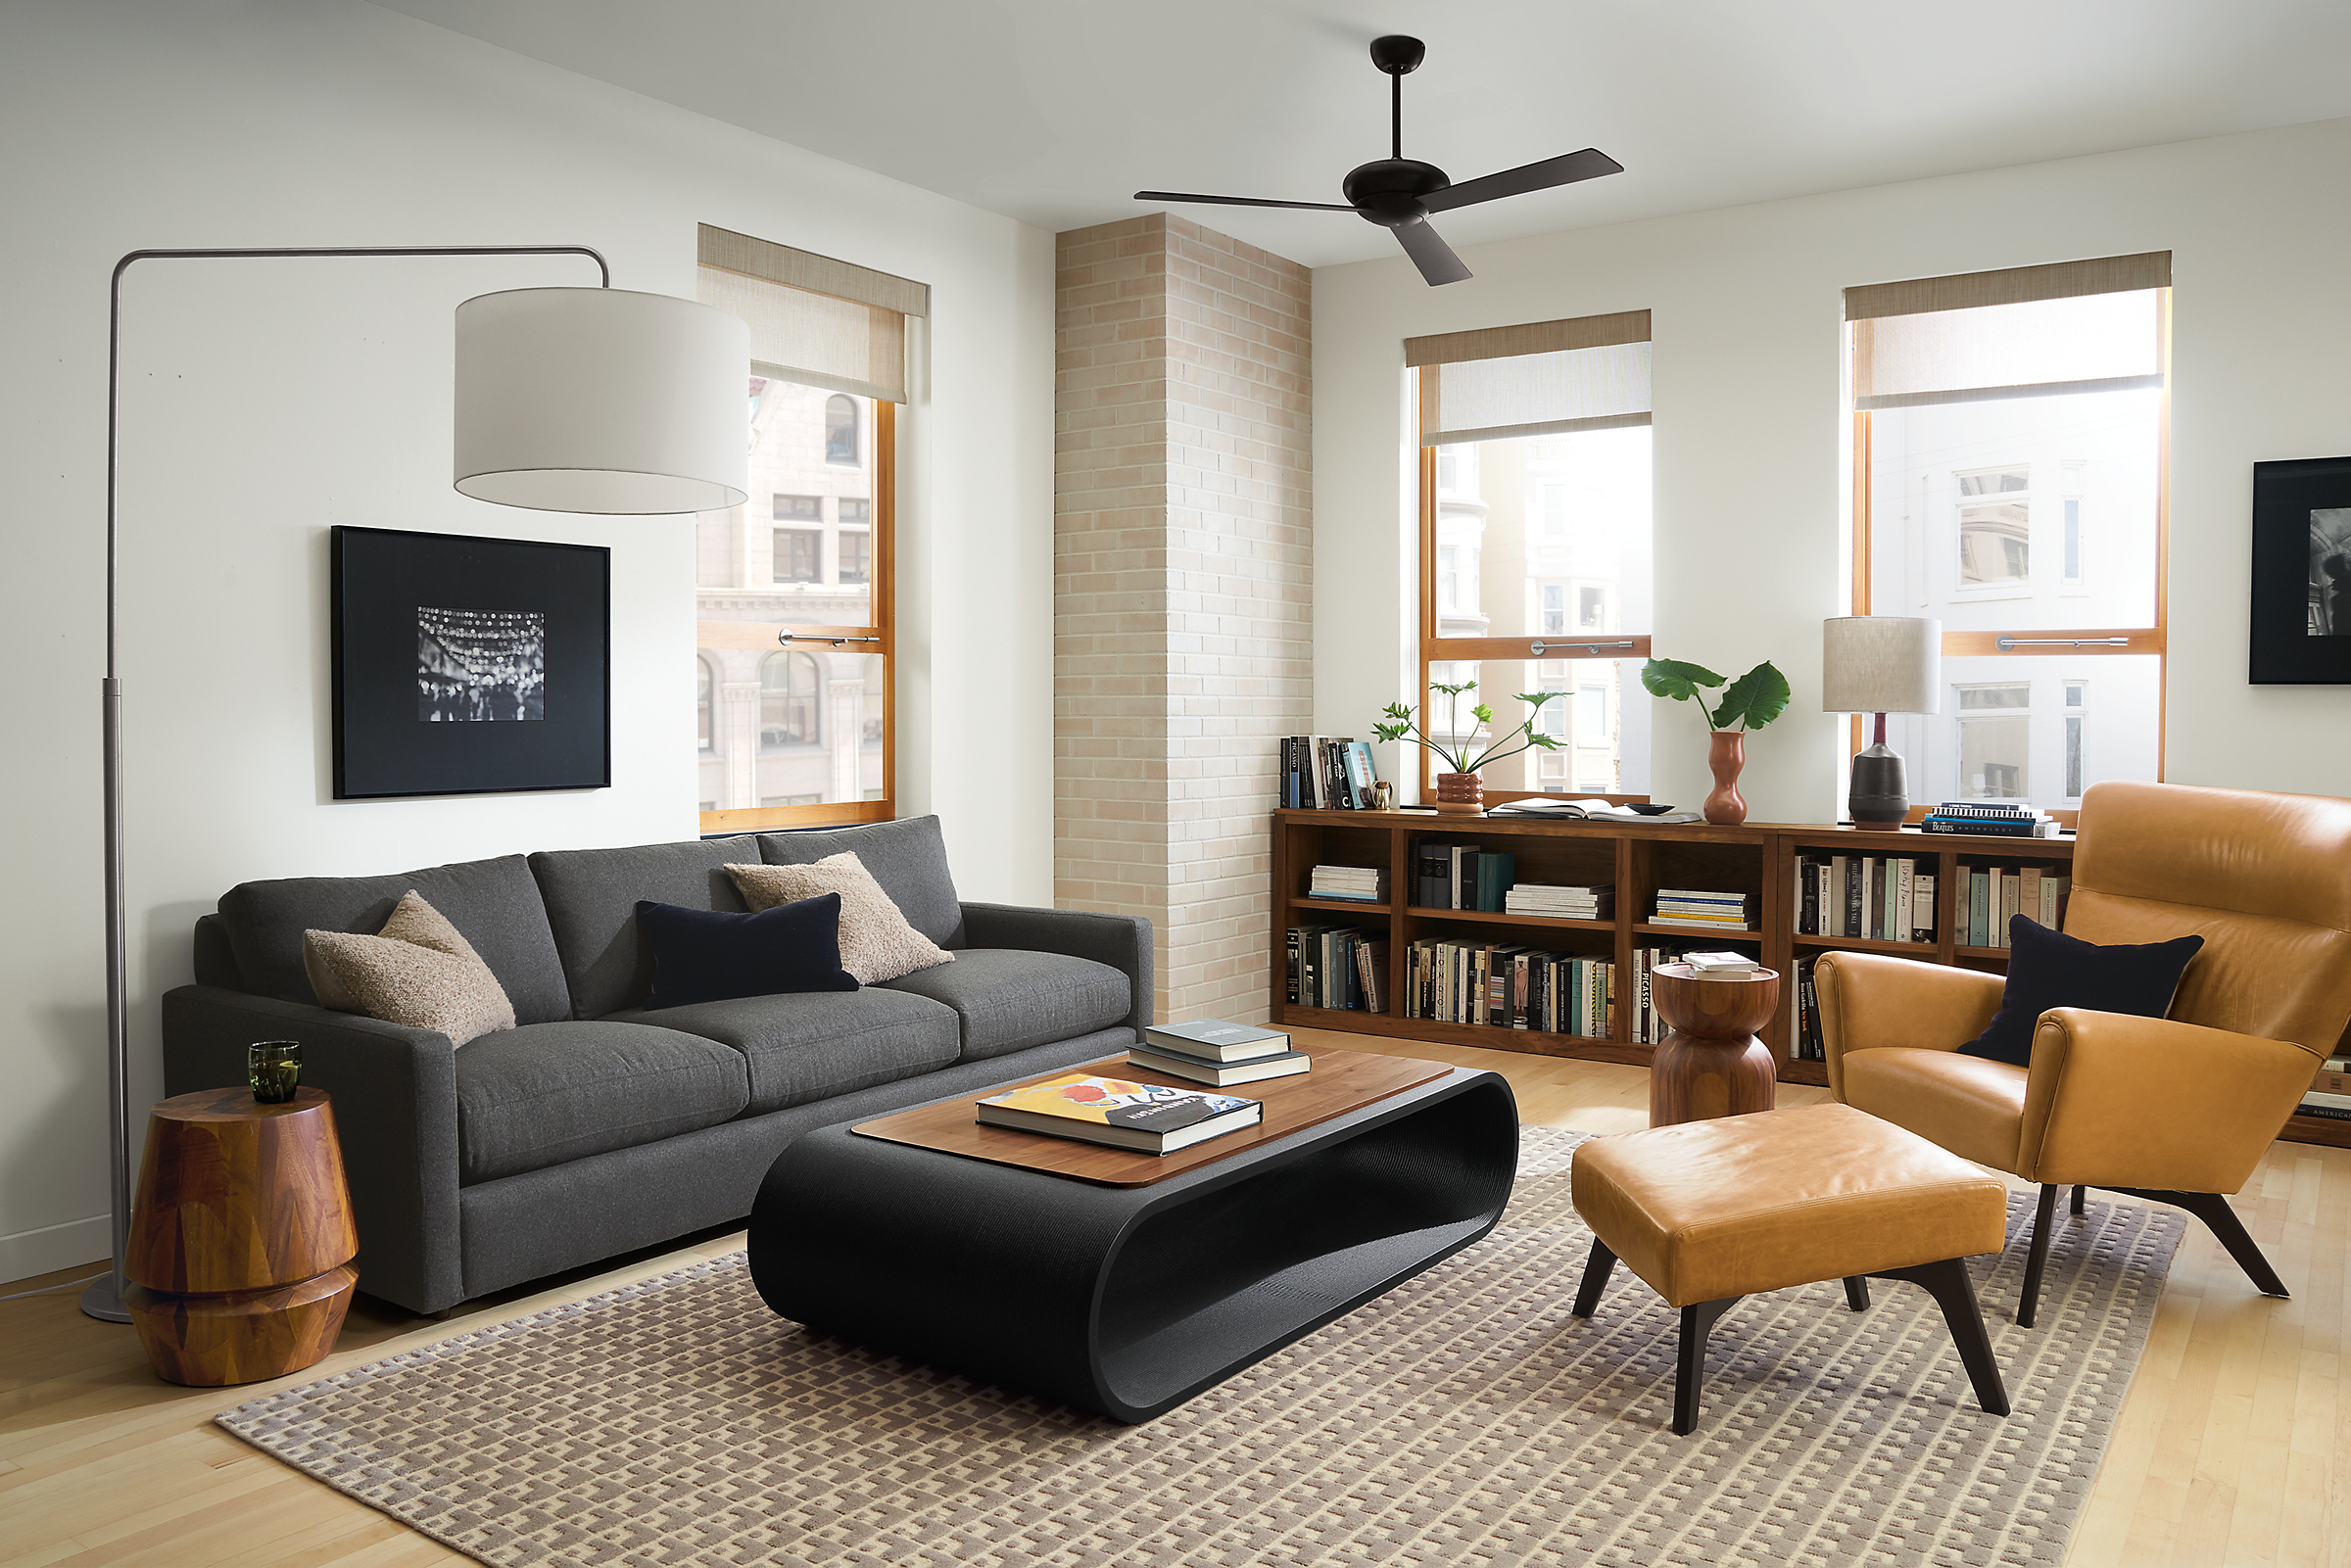 Living room setting with Linger 91-inch Sofa in Flint Charcoal fabric, Boden Chair and Ottoman in Vento Camel leather and Tangent Coffee Table in Black with Walnut top..